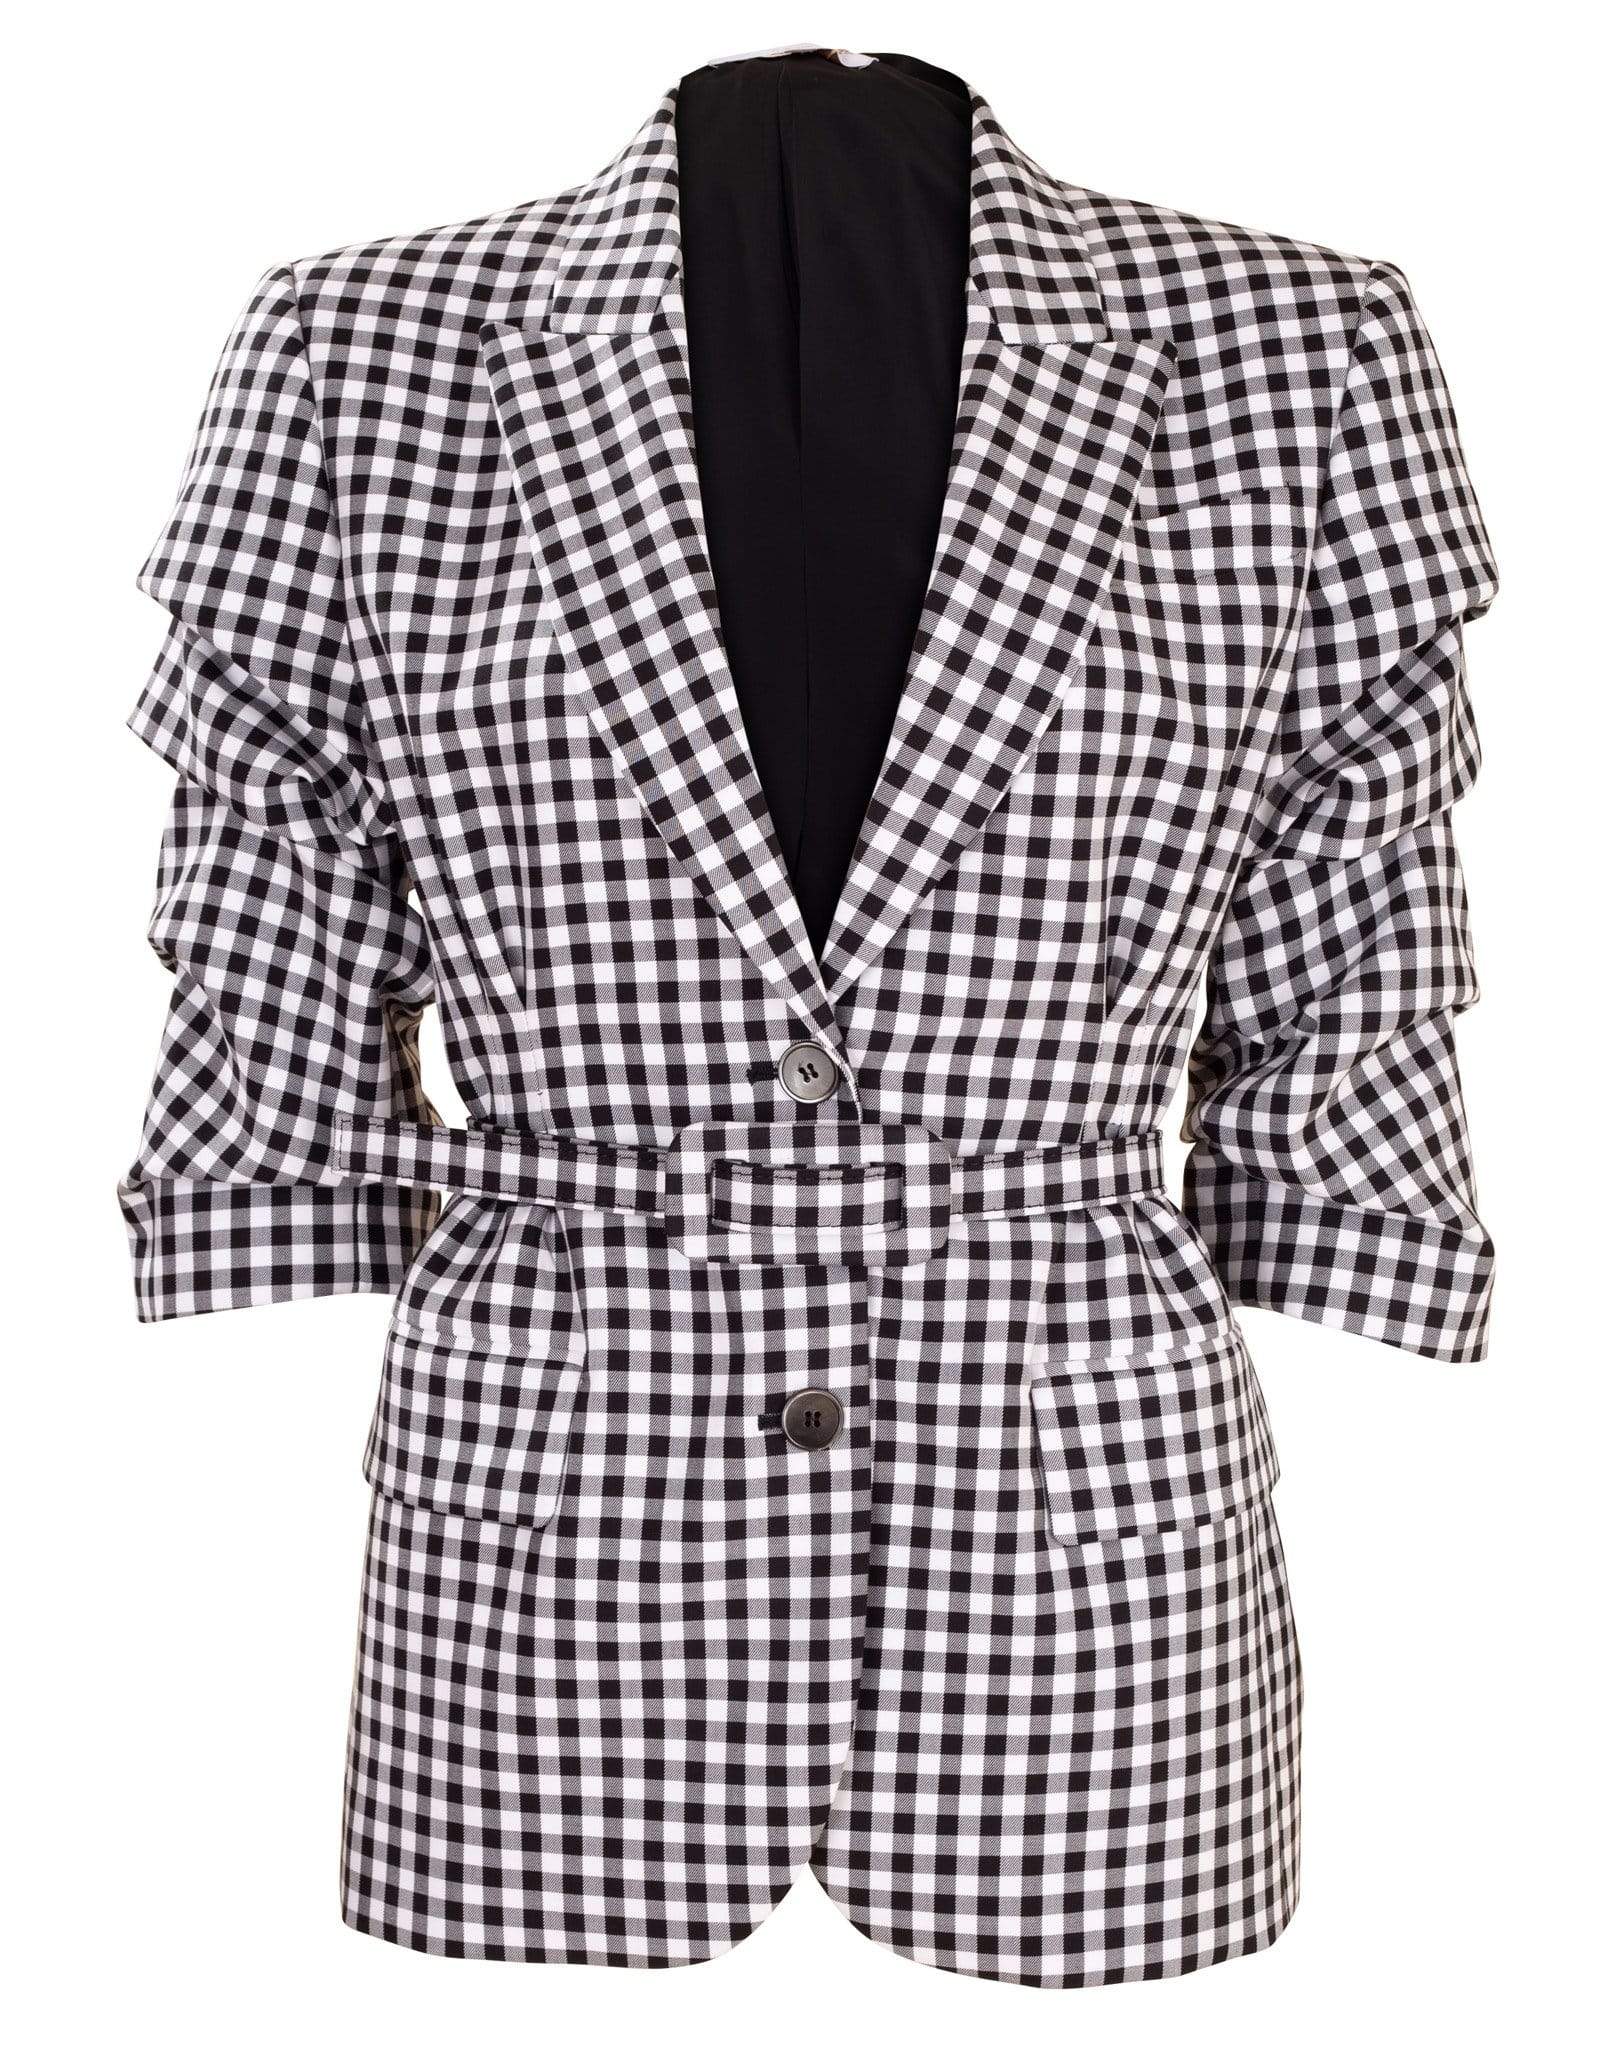 MICHAEL KORS-Black and White Crushed Sleeve Fitted Blazer-